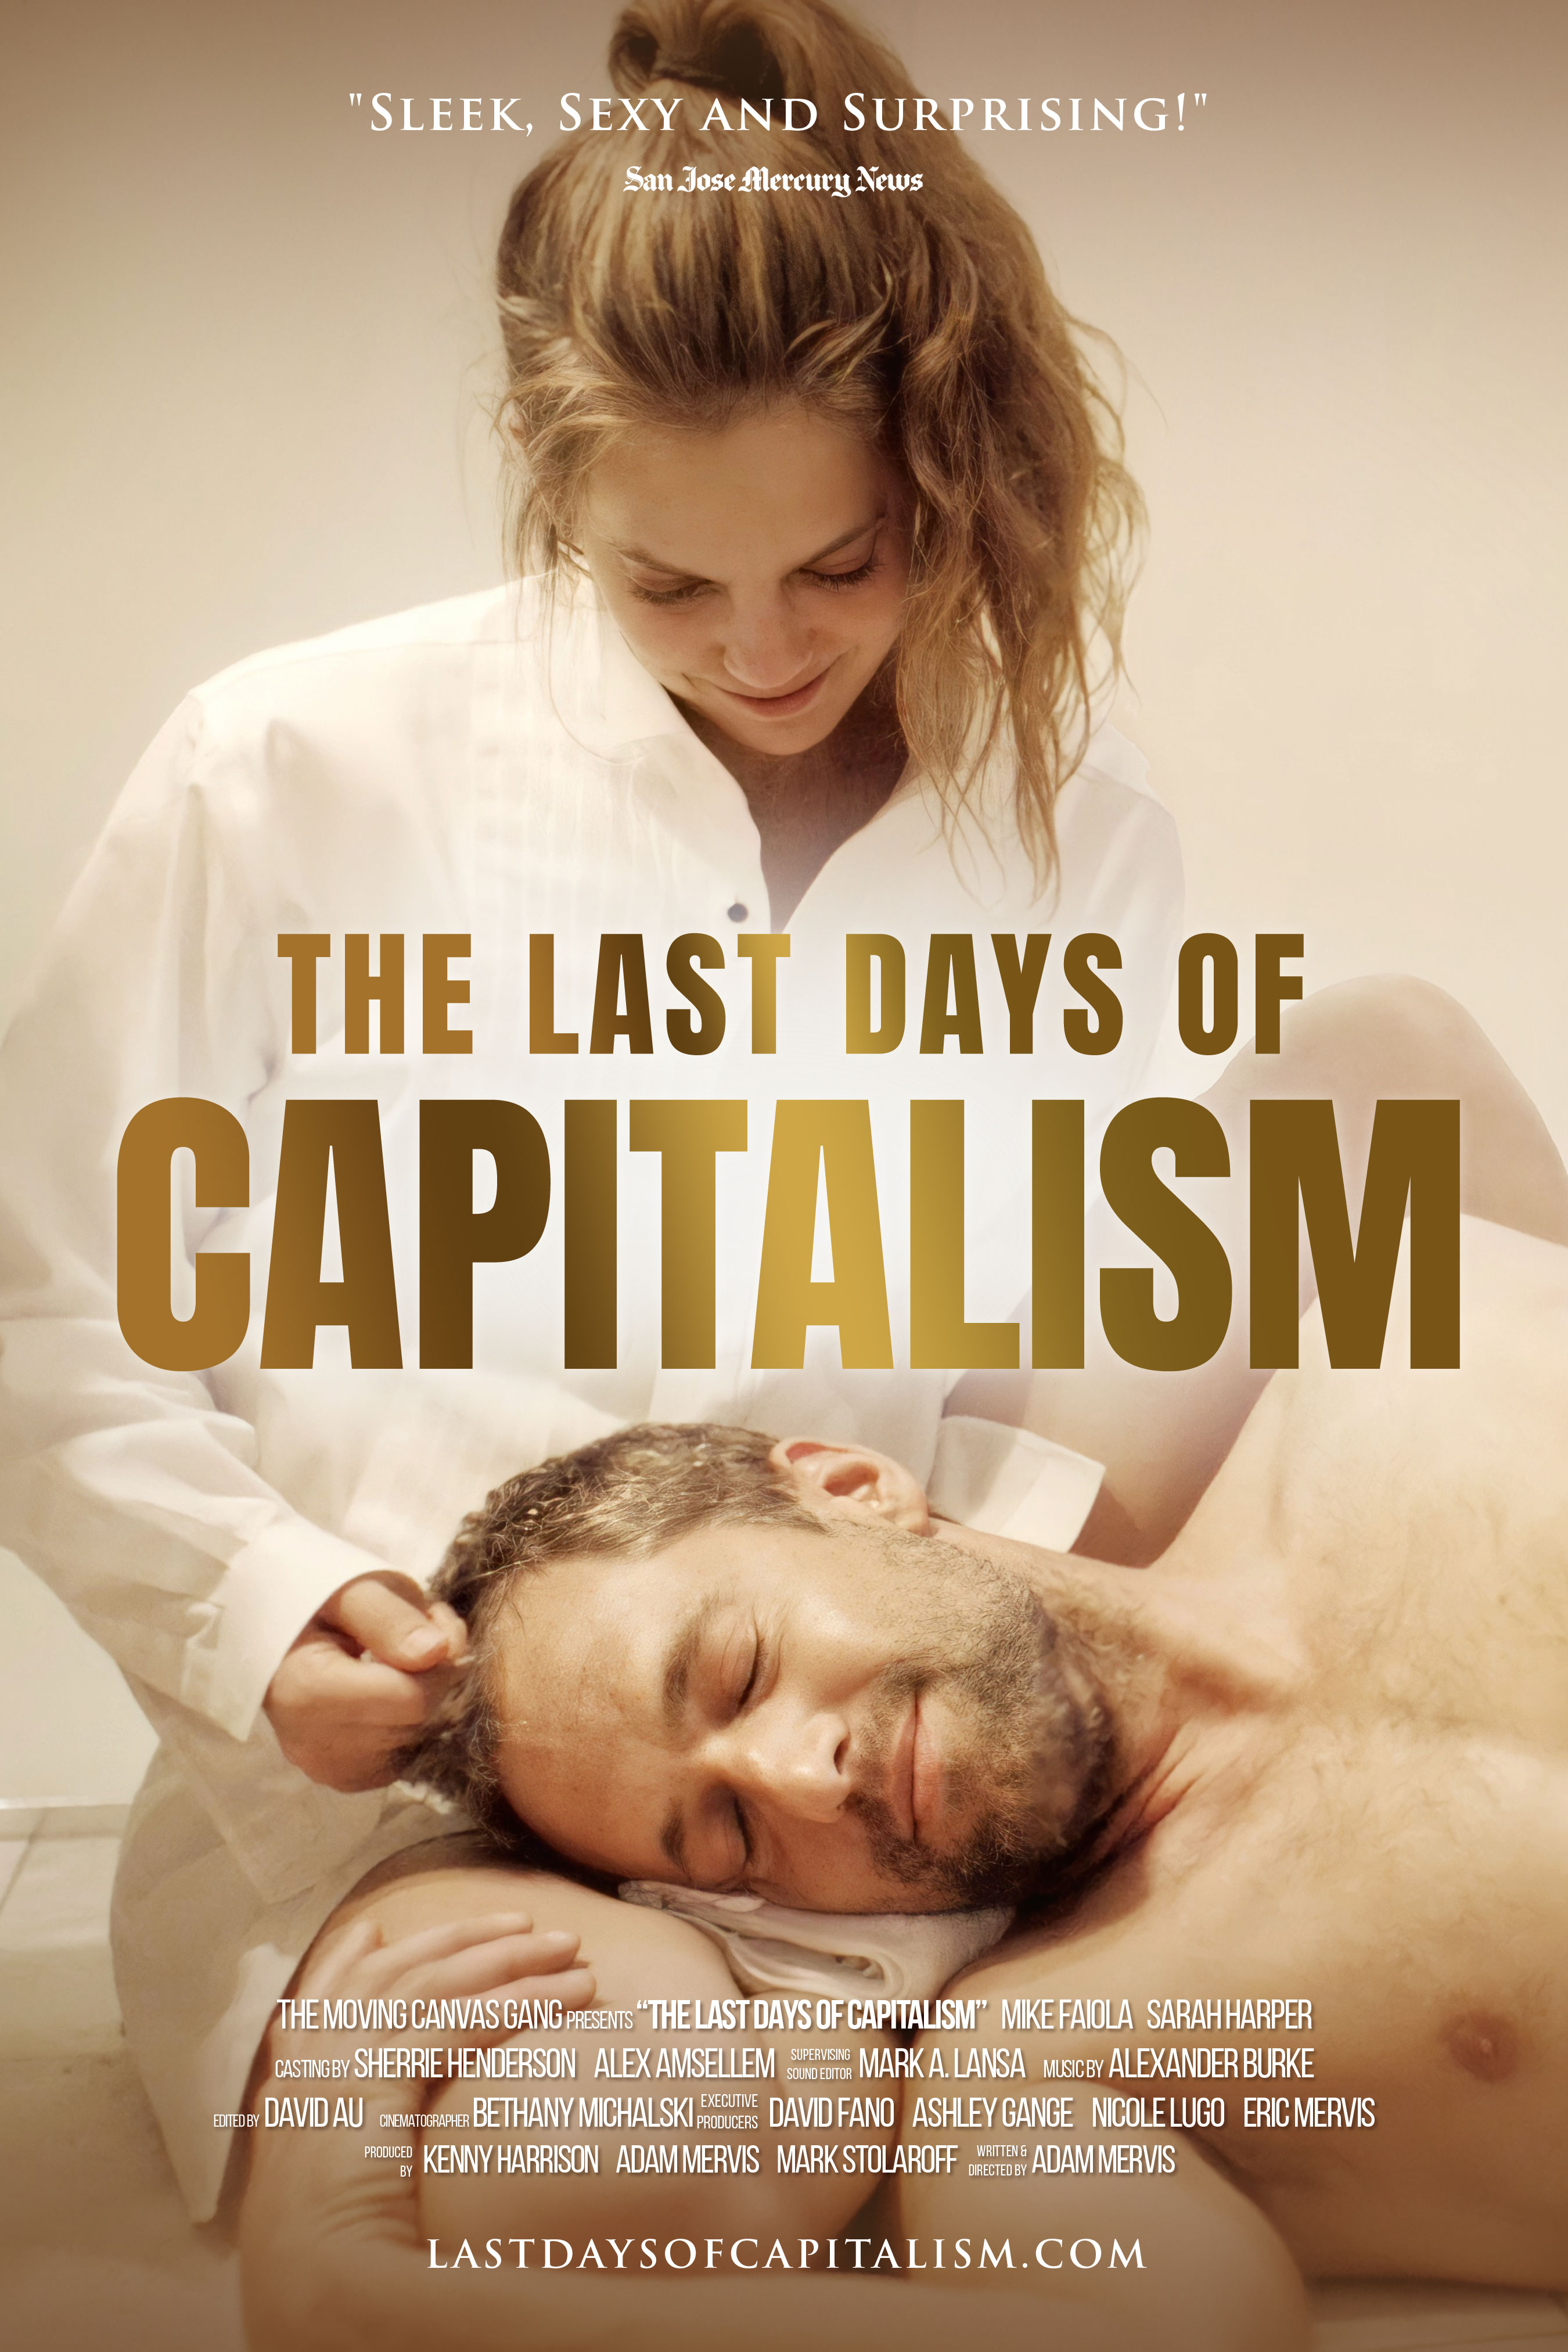 18+ The Last Days of Capitalism 2021 English Movie 1080p HDRip 1.42GB Download